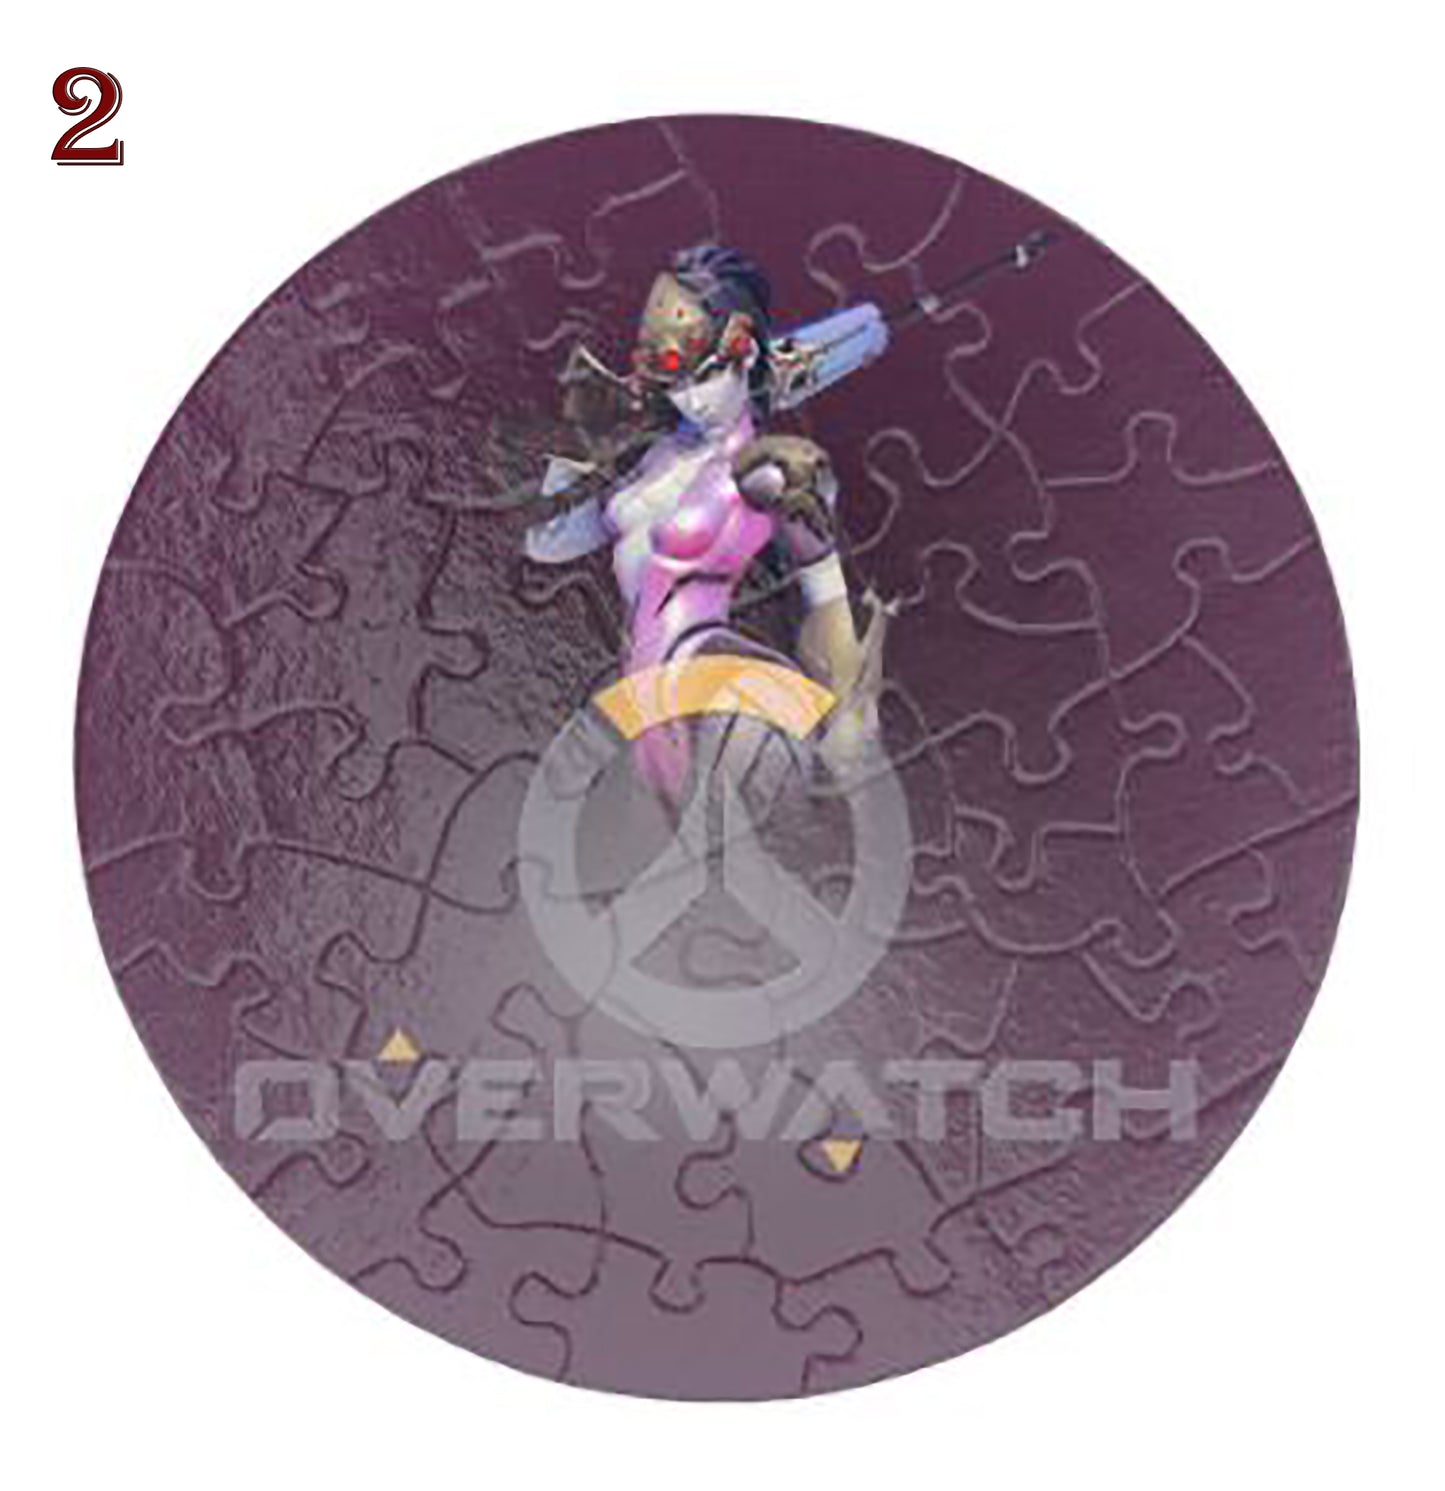 Cardboard puzzles different shapes Overwatch Puzzles, Adult Puzzle, Decompression Toy, Creative Gift, Birthday Gift/ DVA / overwatch game